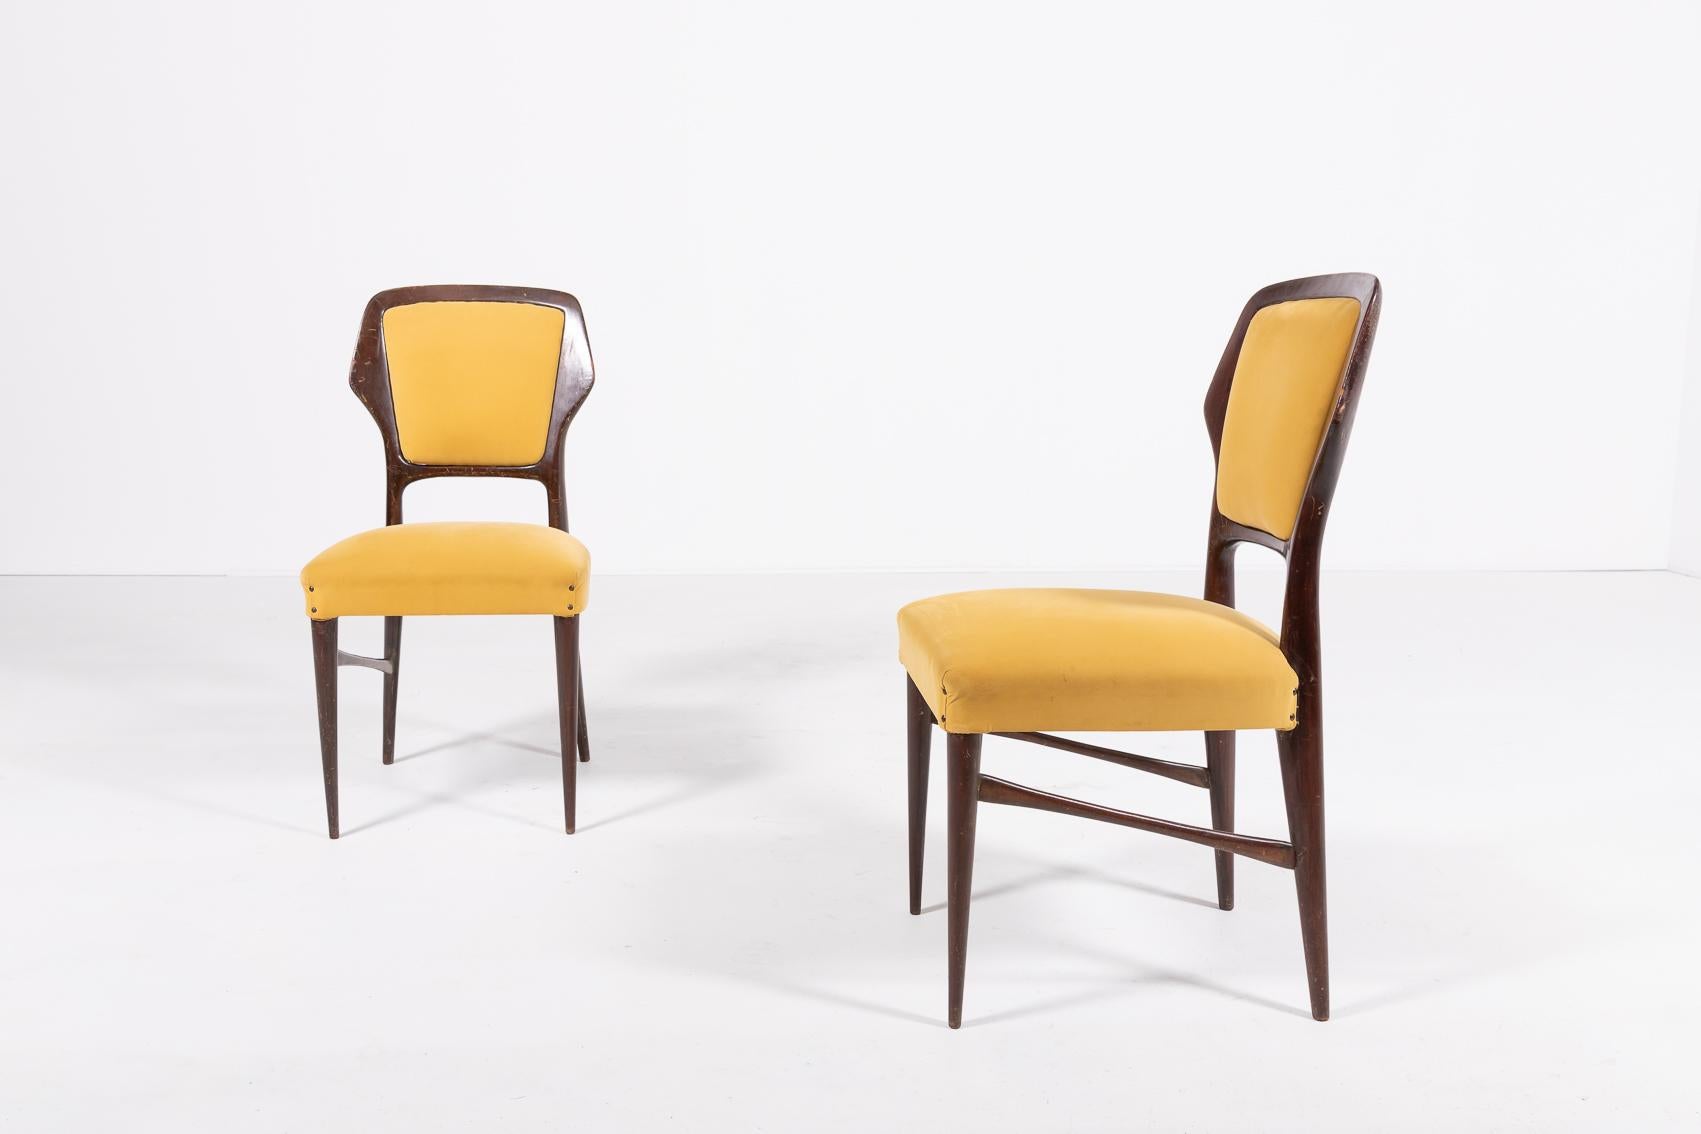 Varnished Italian Mid-Century Modern chairs from Vittorio Dassi, 1960s For Sale